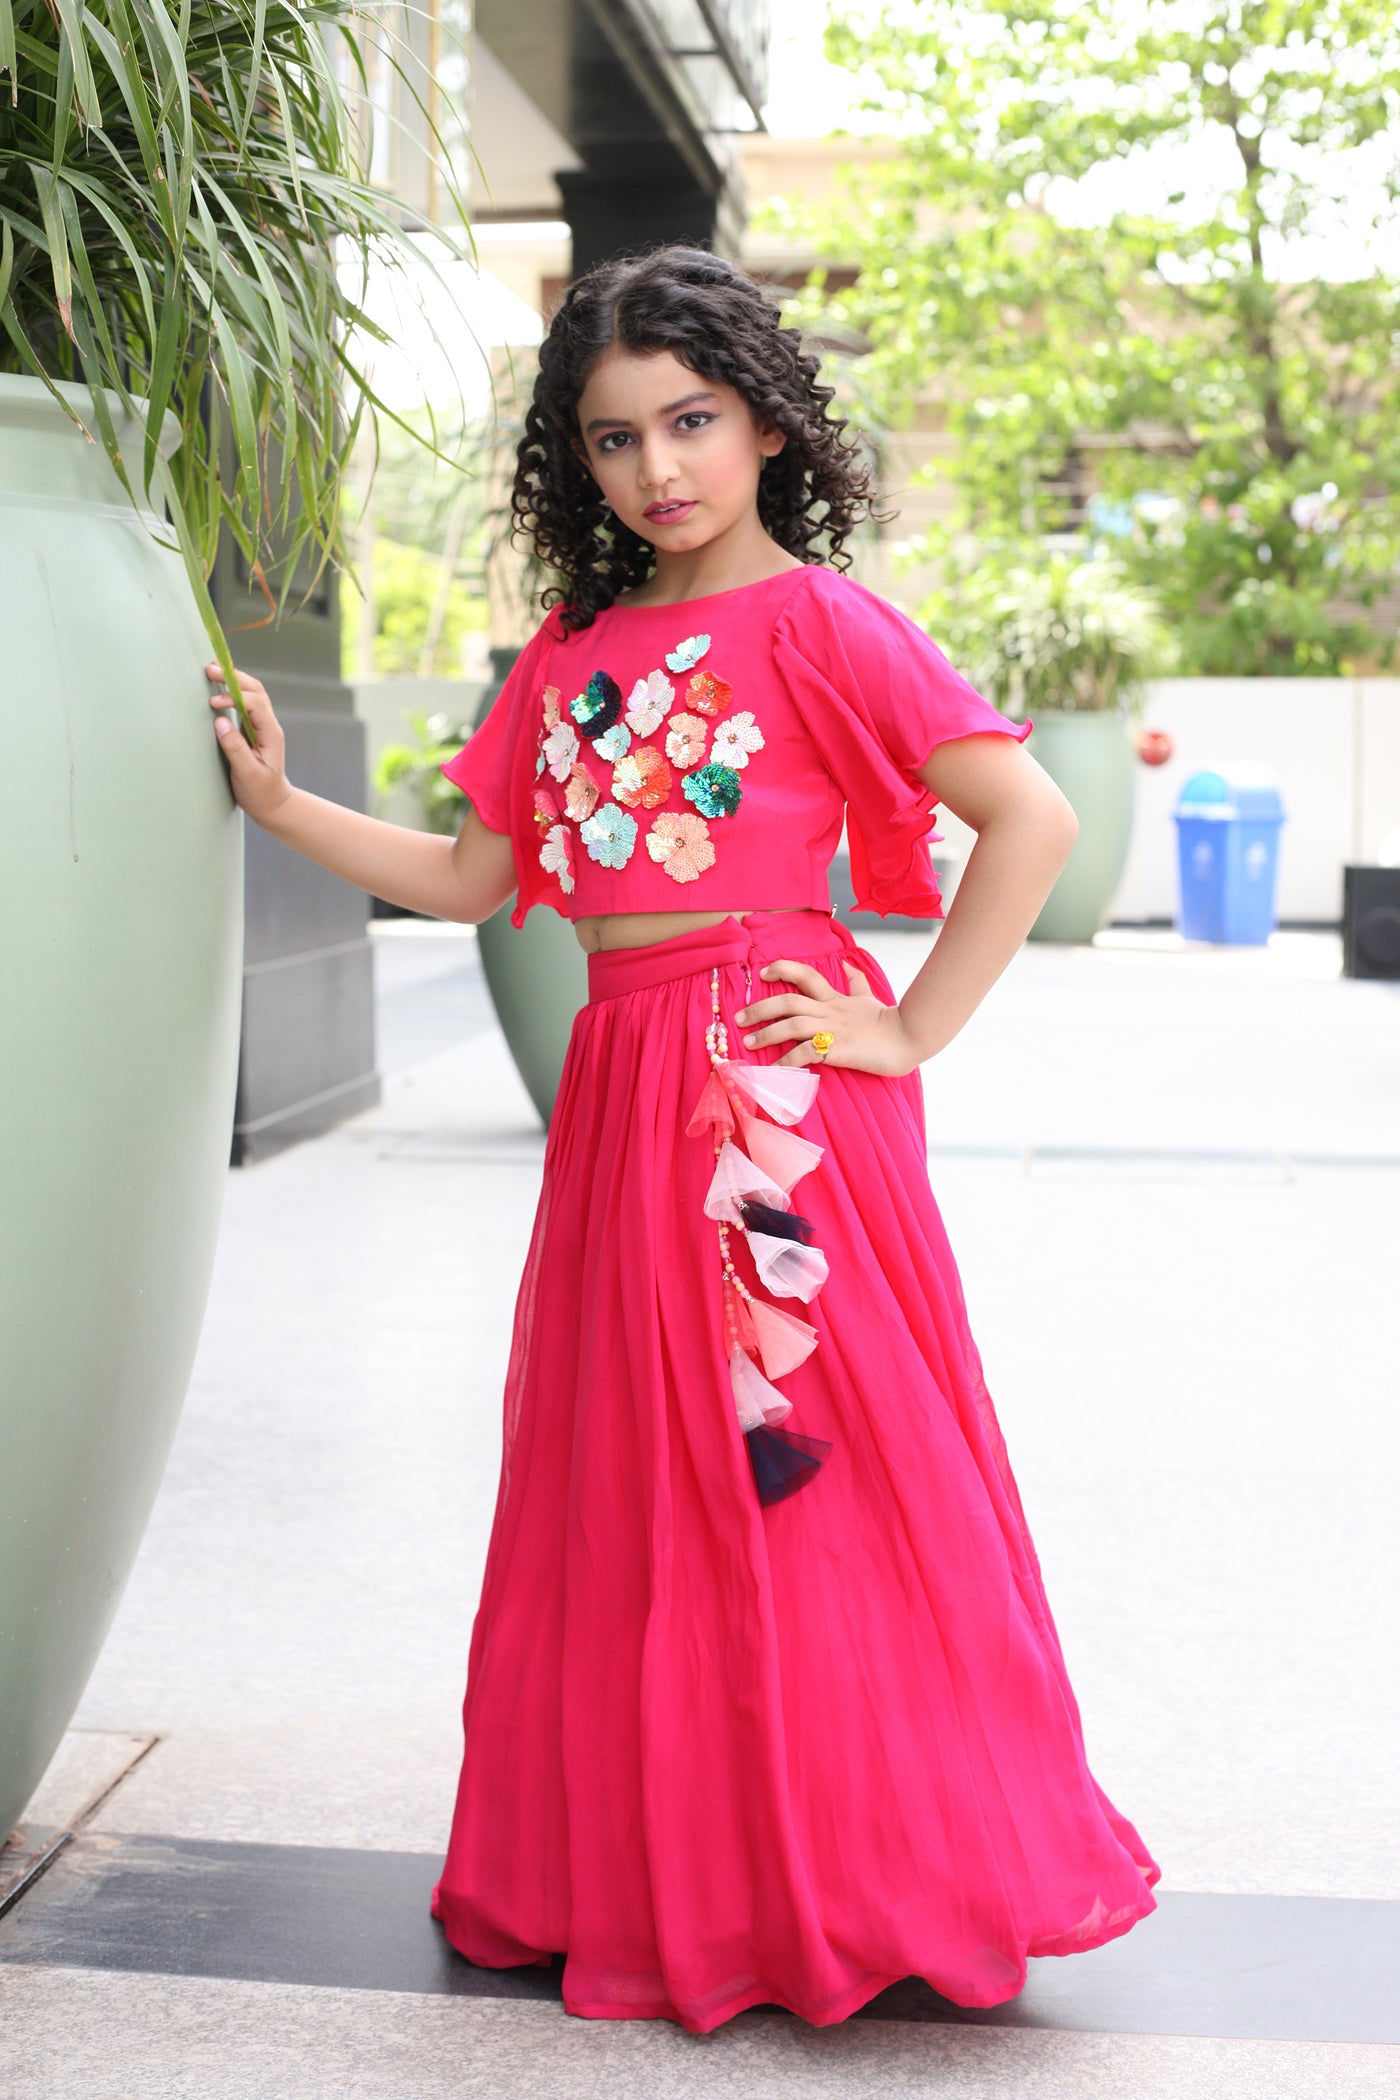 Girls' Pink Flower Pedal Lehenga Indian Clothing in Denver, CO, Aurora, CO, Boulder, CO, Fort Collins, CO, Colorado Springs, CO, Parker, CO, Highlands Ranch, CO, Cherry Creek, CO, Centennial, CO, and Longmont, CO. NATIONWIDE SHIPPING USA- India Fashion X